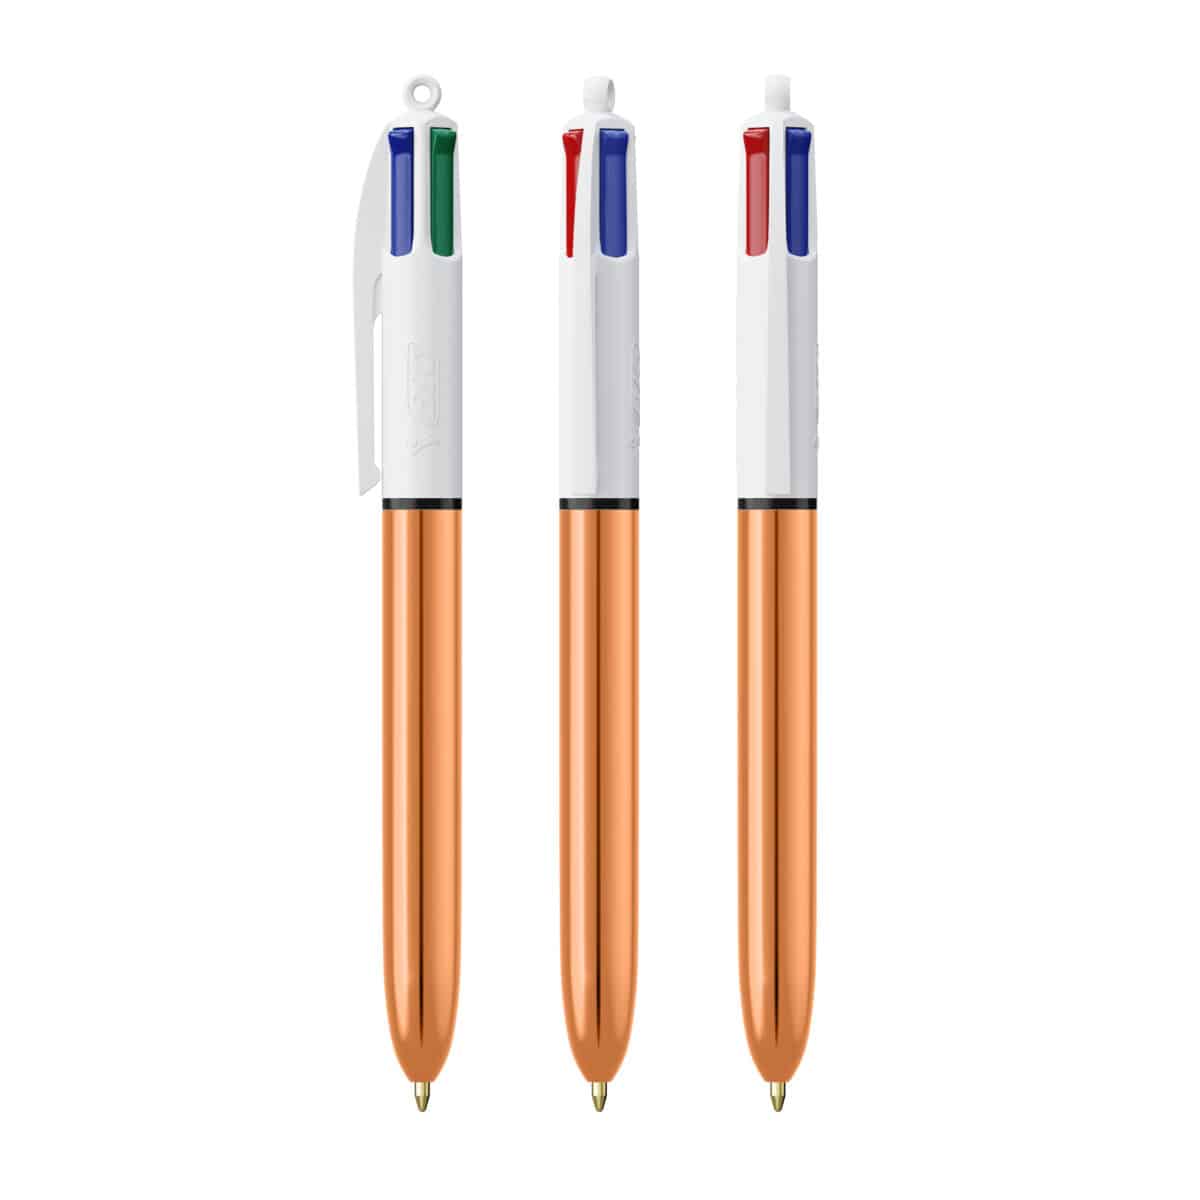 3 faces bic 4 couleurs versions shine blanc or rose